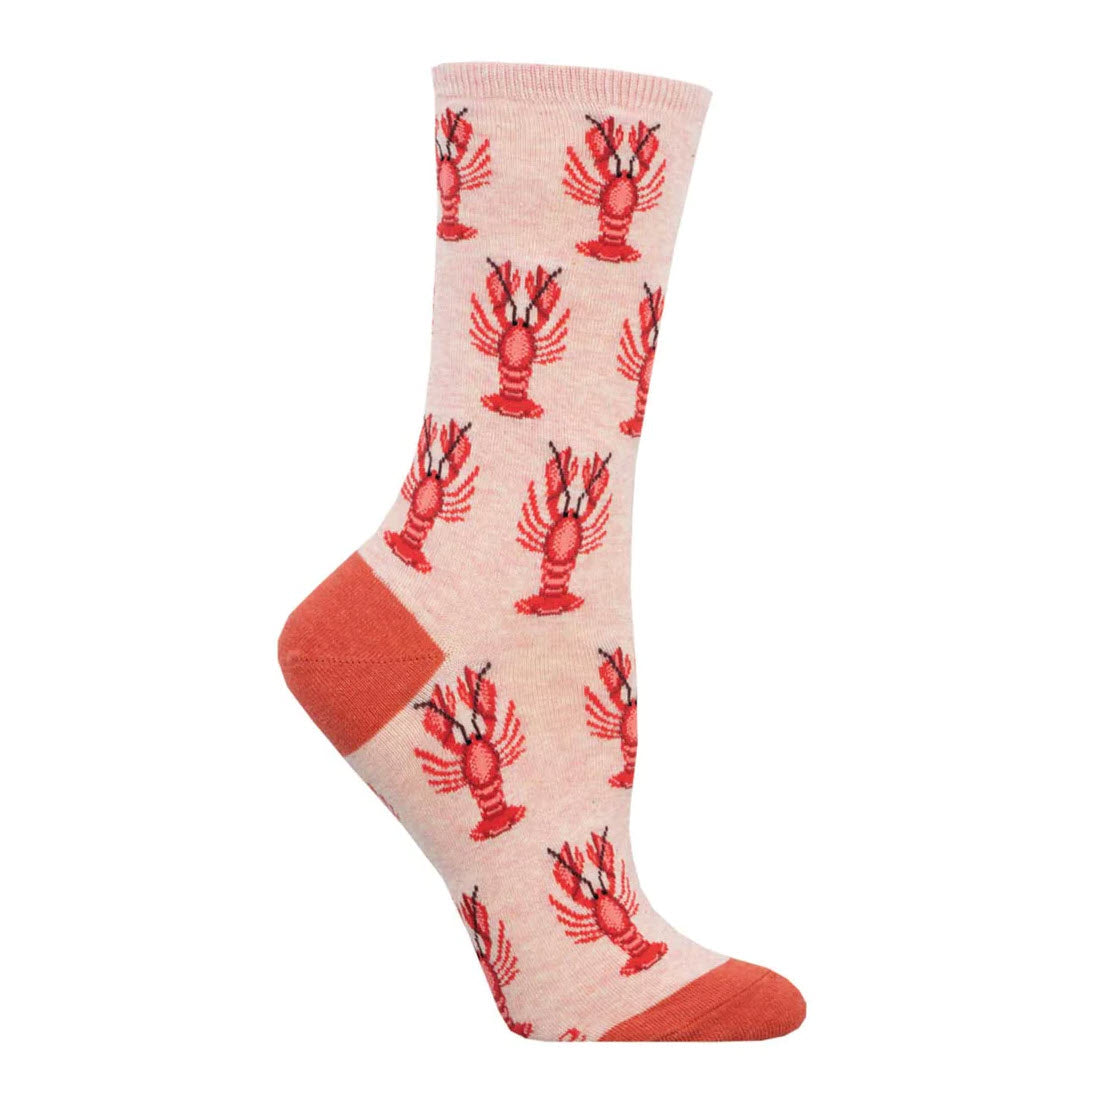 A pink SOCKSMITH LOBSTAH CREW SOCKS PINK - WOMENS with multiple red lobster designs, described as the best catch, displayed against a plain white background.